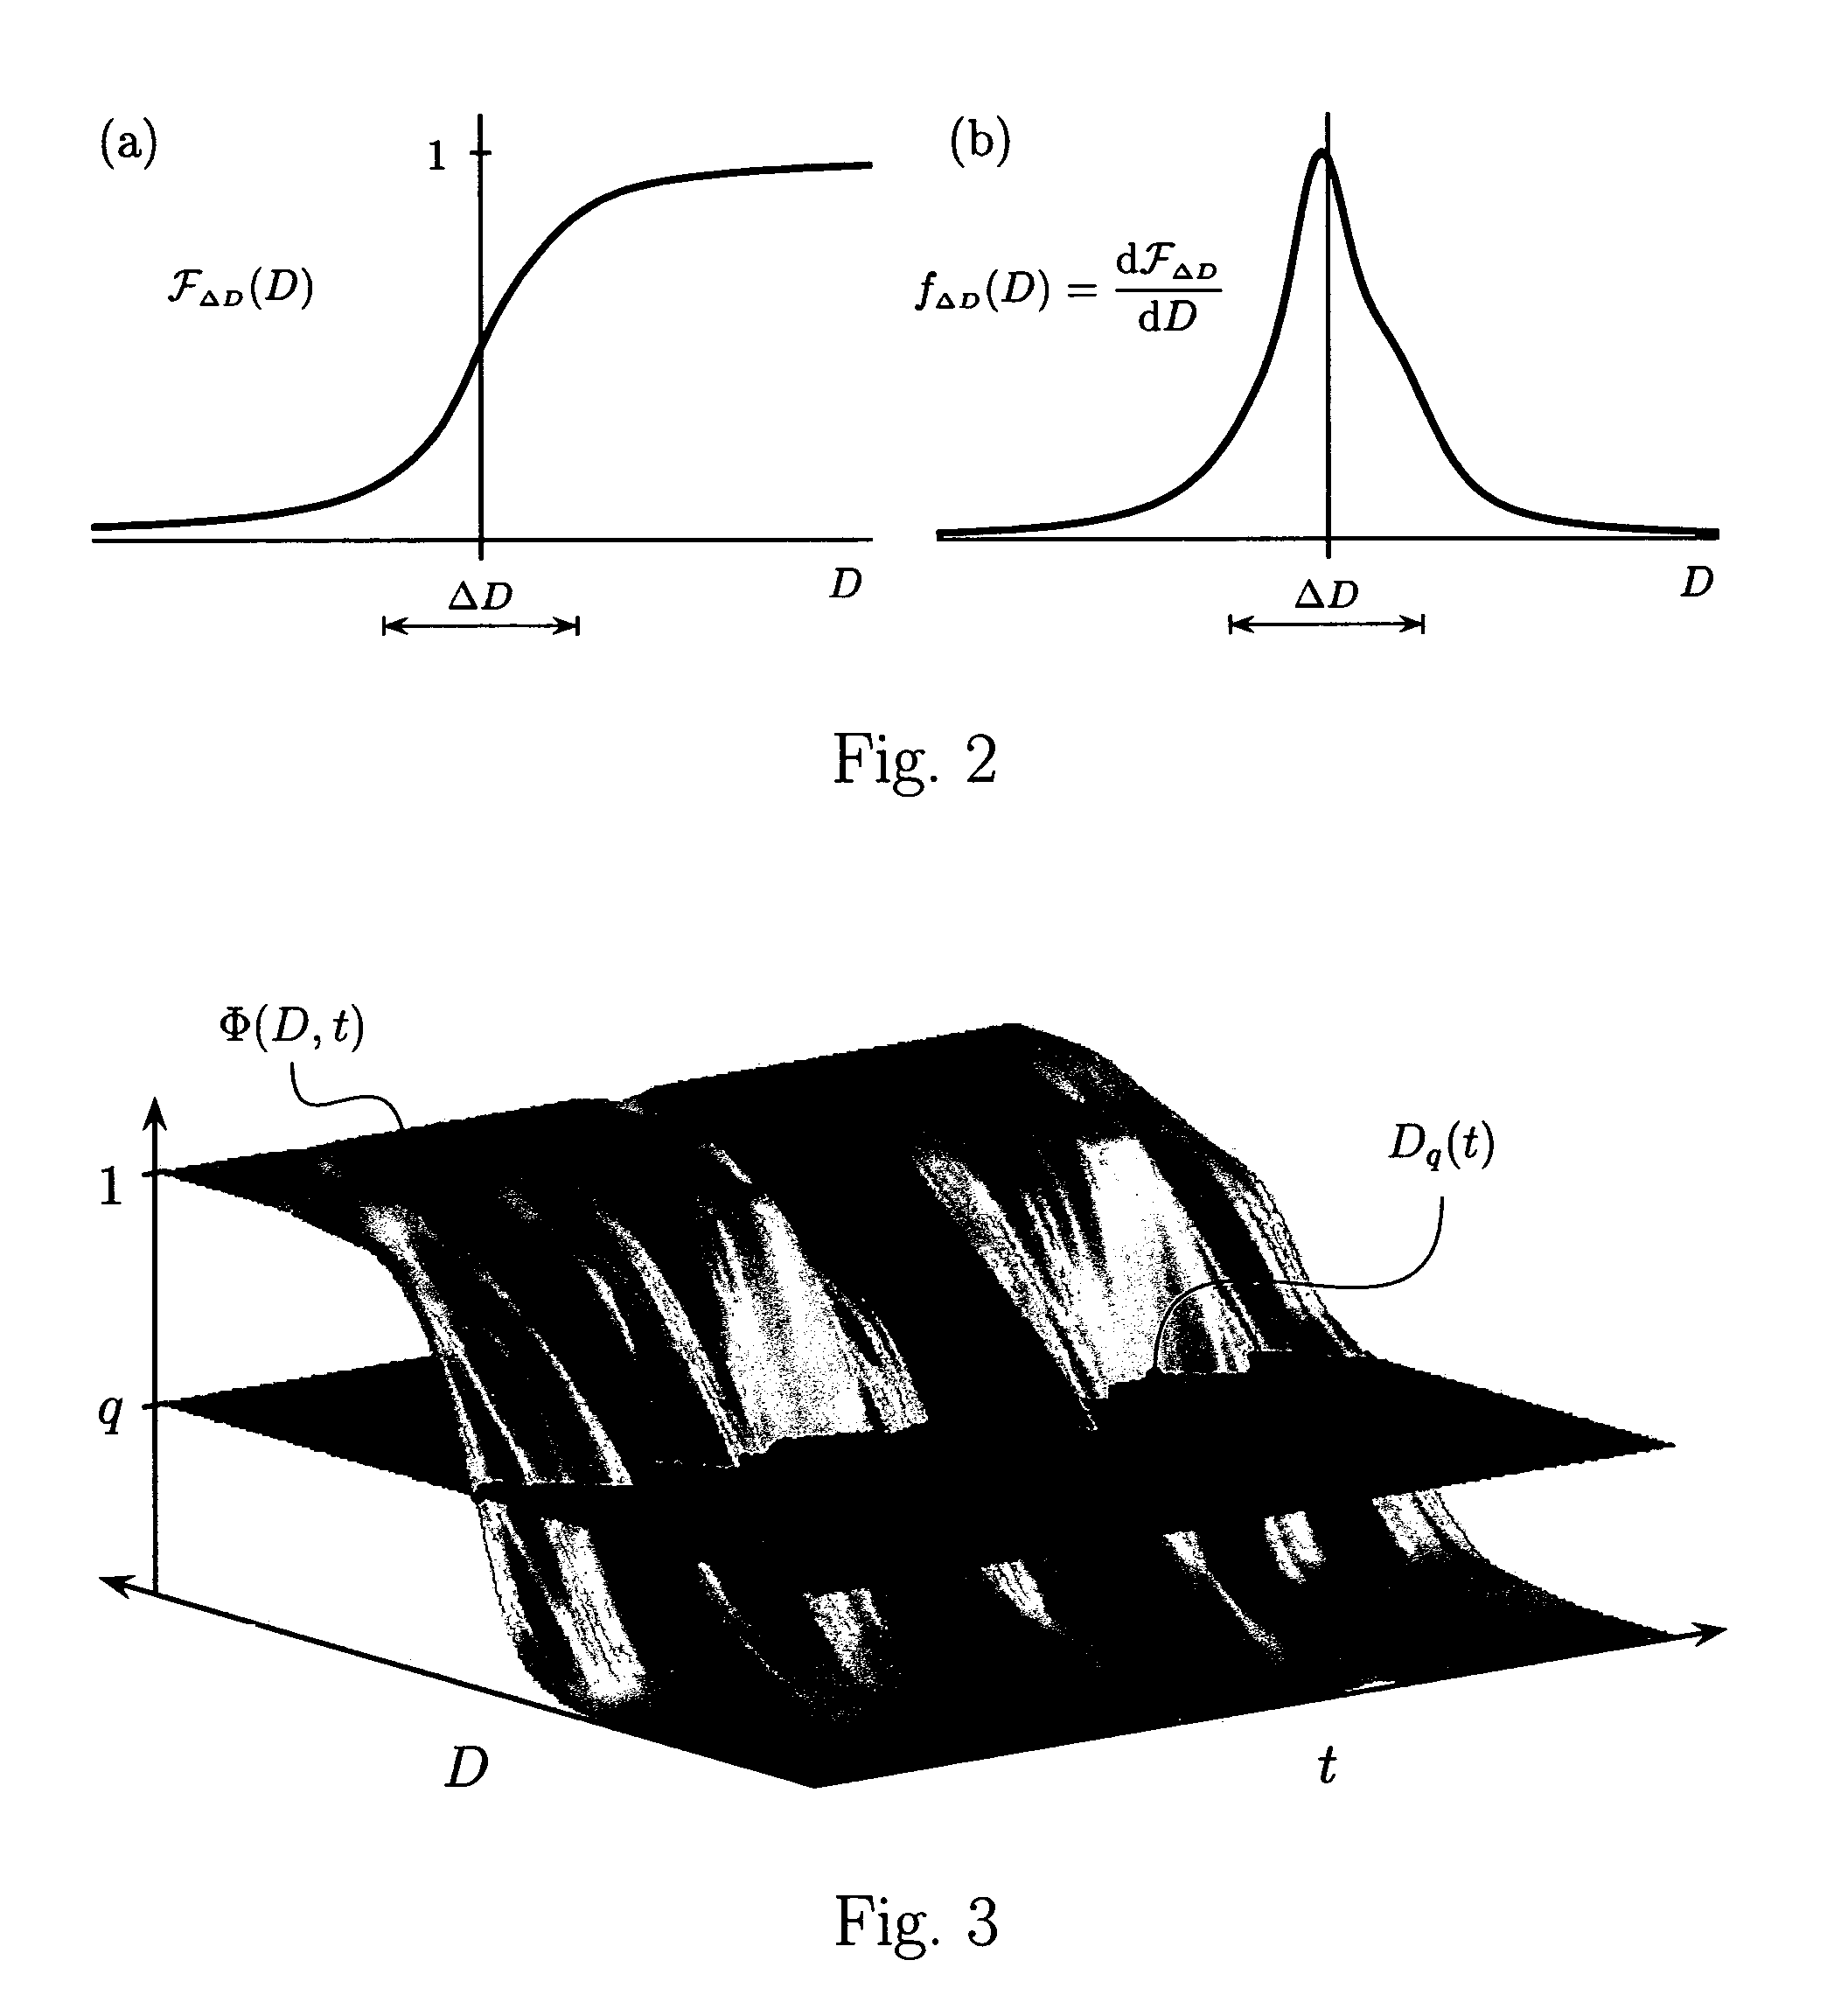 Method and apparatus for adaptive real-time signal conditioning, processing, analysis, quantification, comparision, and control